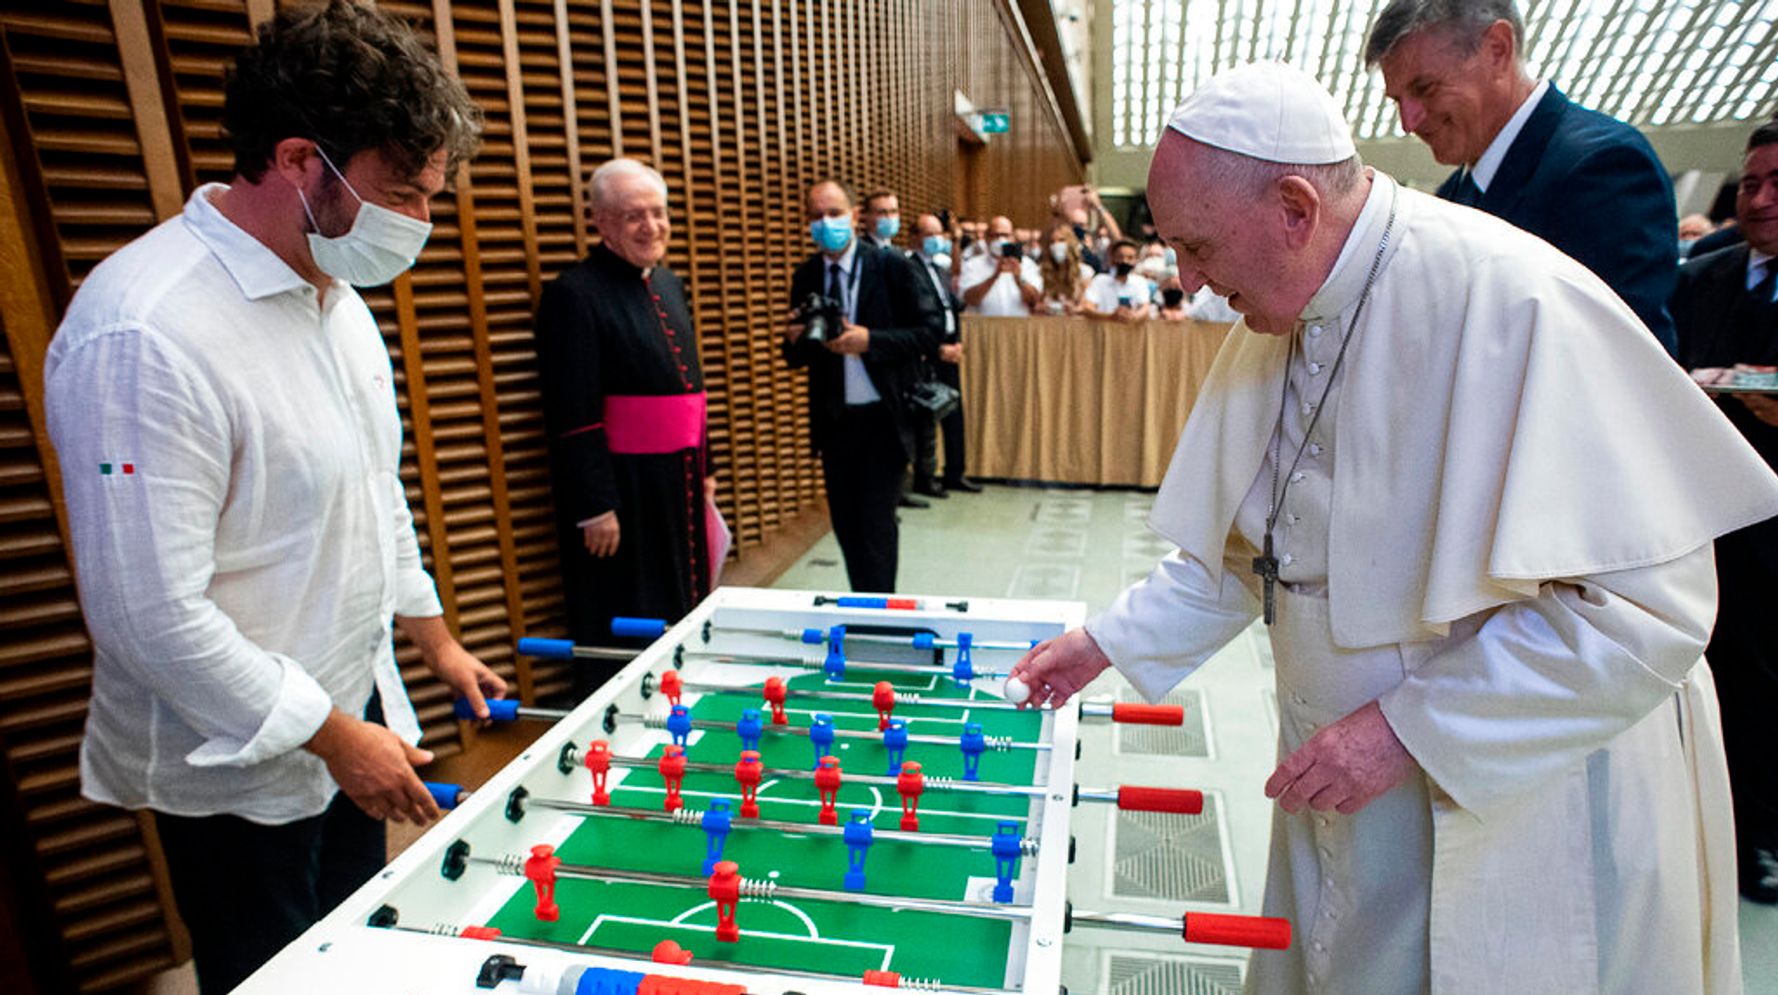 Soccer-Loving Pope Francis Finally Gets A Foosball Table